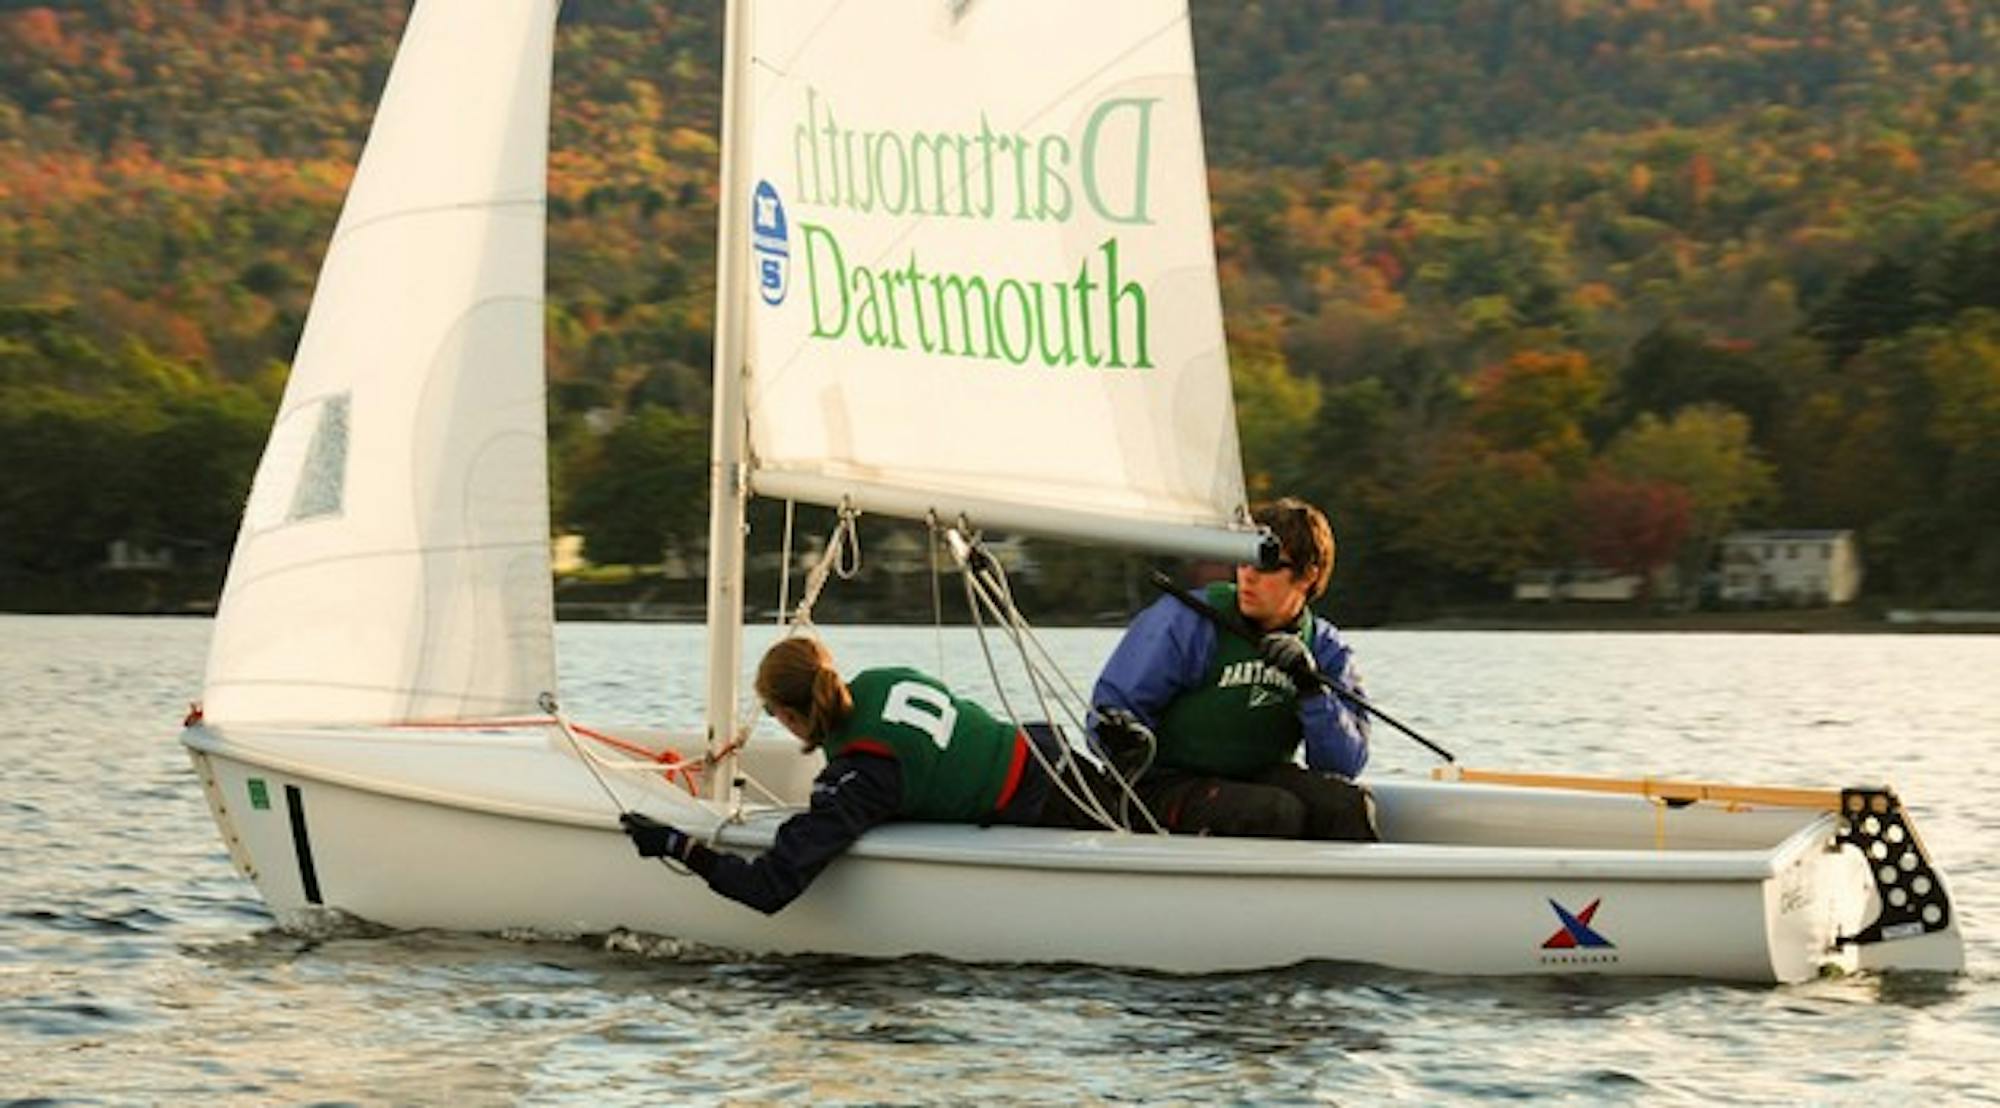 The Big Green sailing team competed in four separate regattas over the weekend, winning one overall and placing in the top 10 in two others.